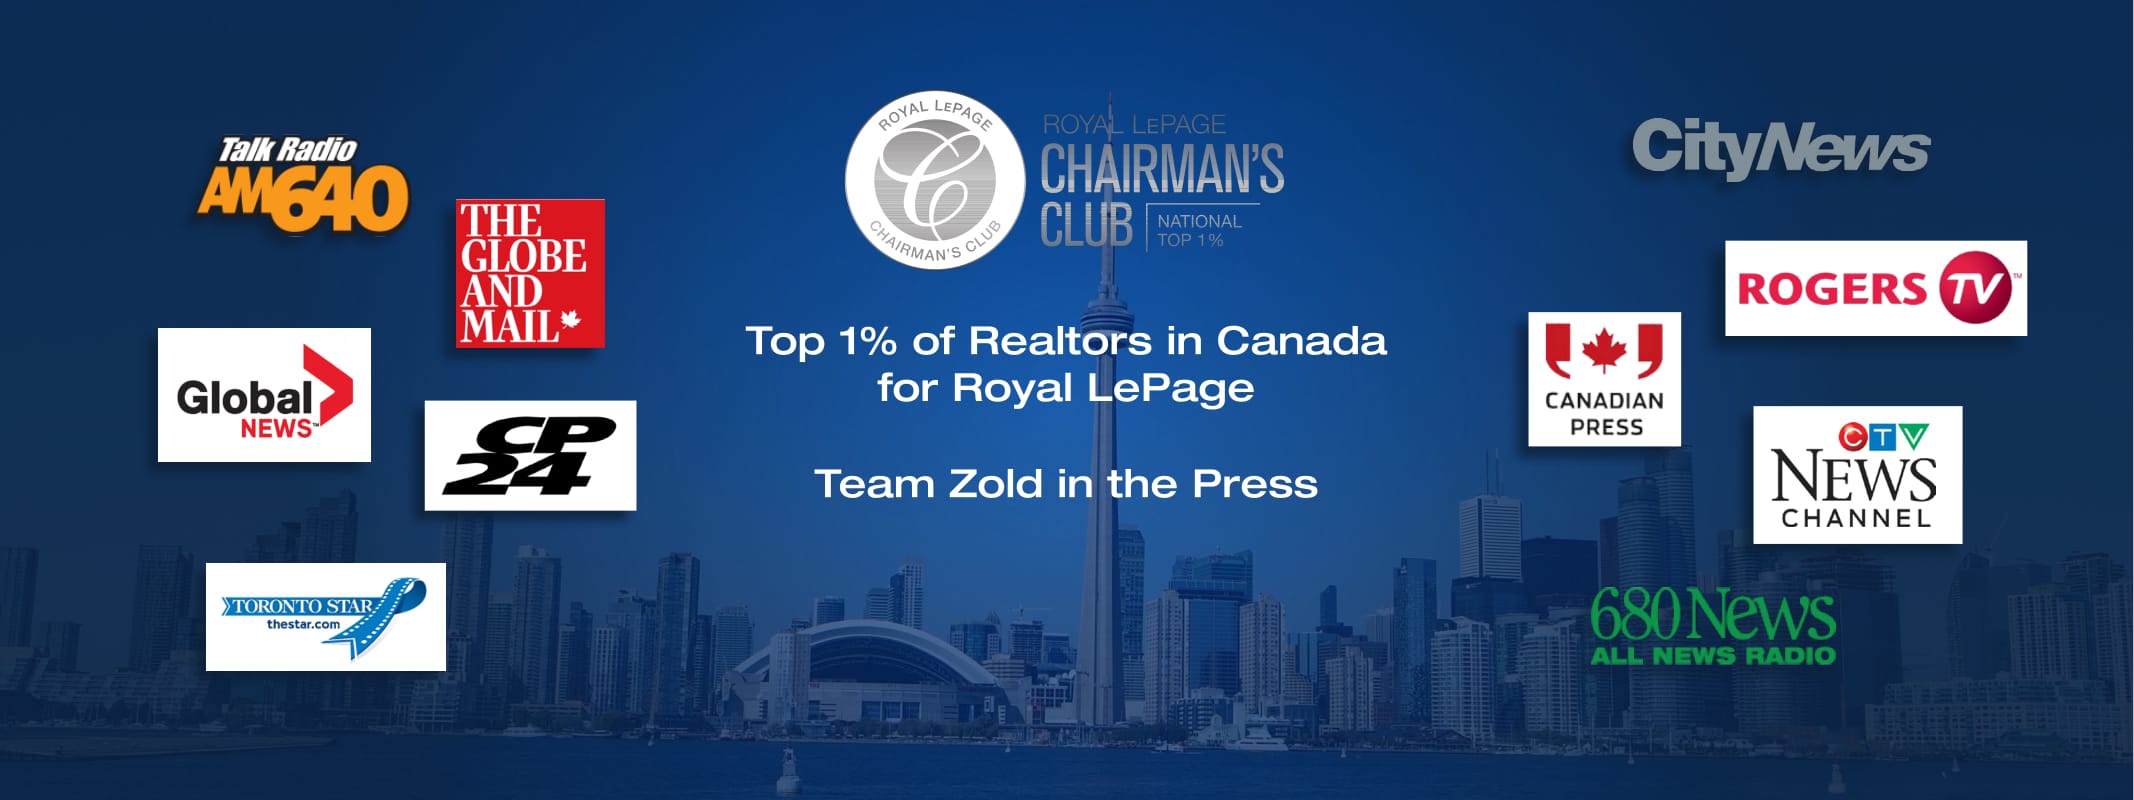 Top 1% of Realtors in Canada for Royal LePage, Team Zold